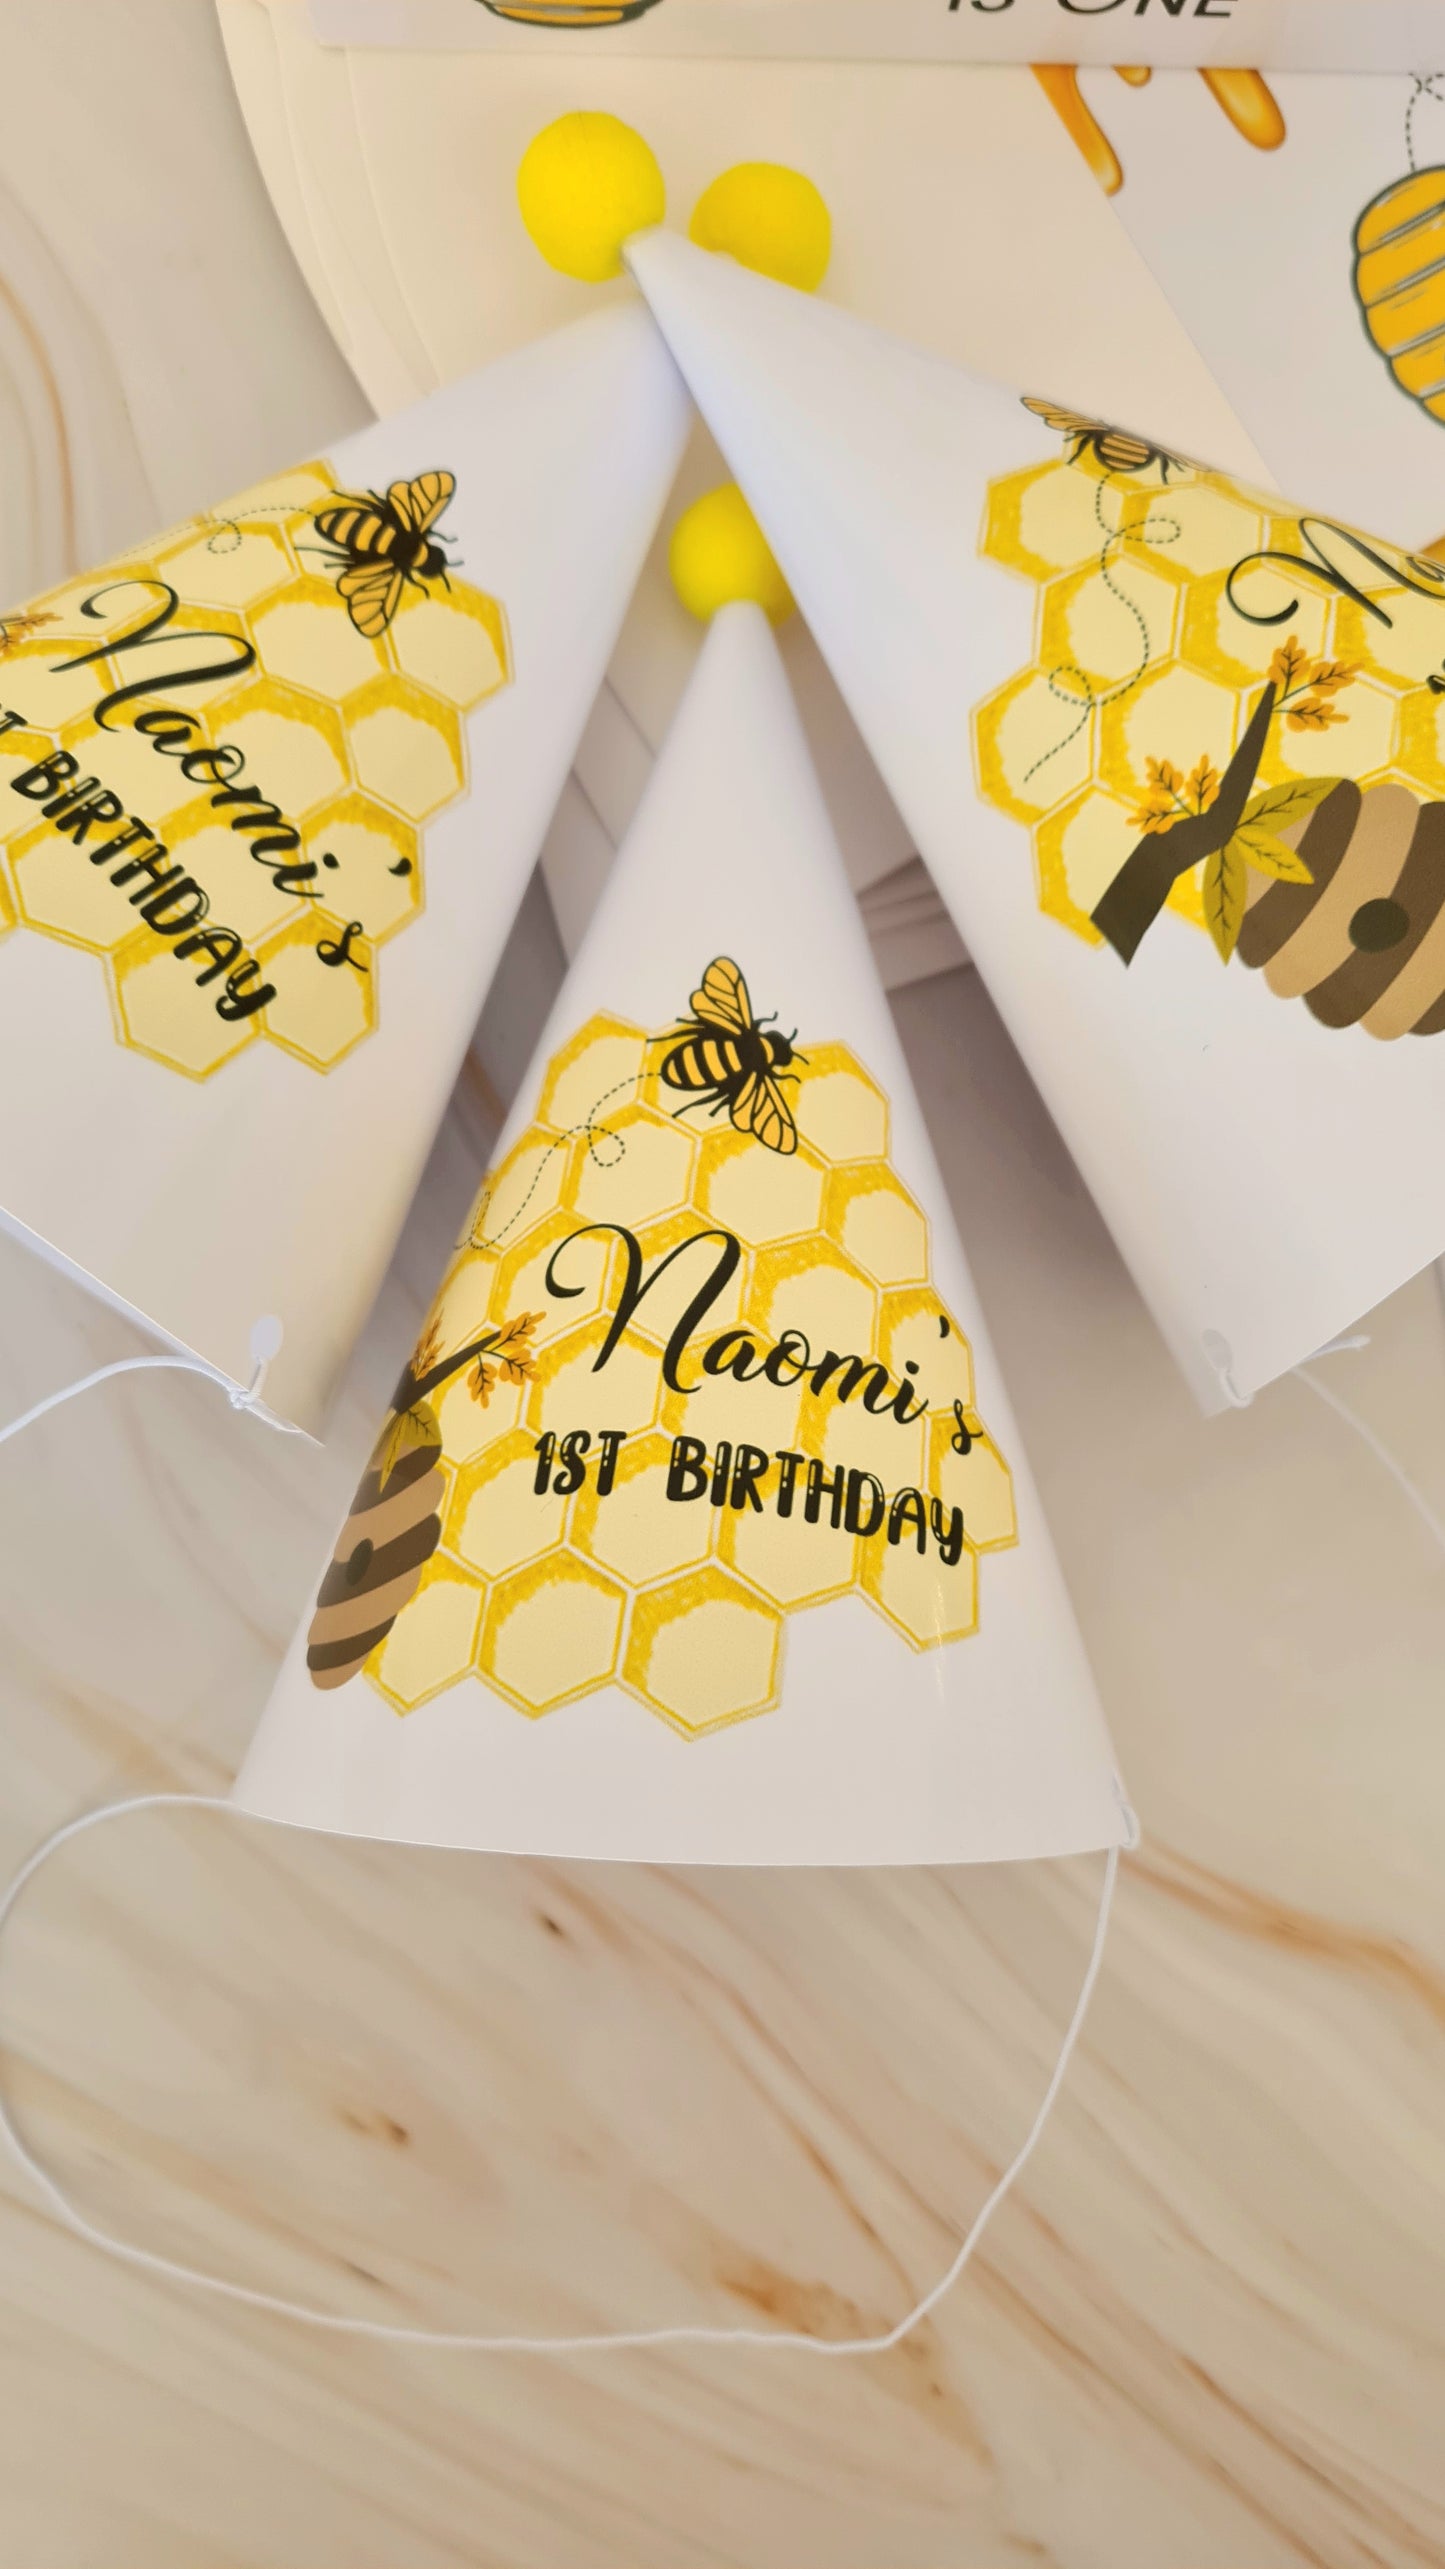 Bumble Bee Theme Party Box